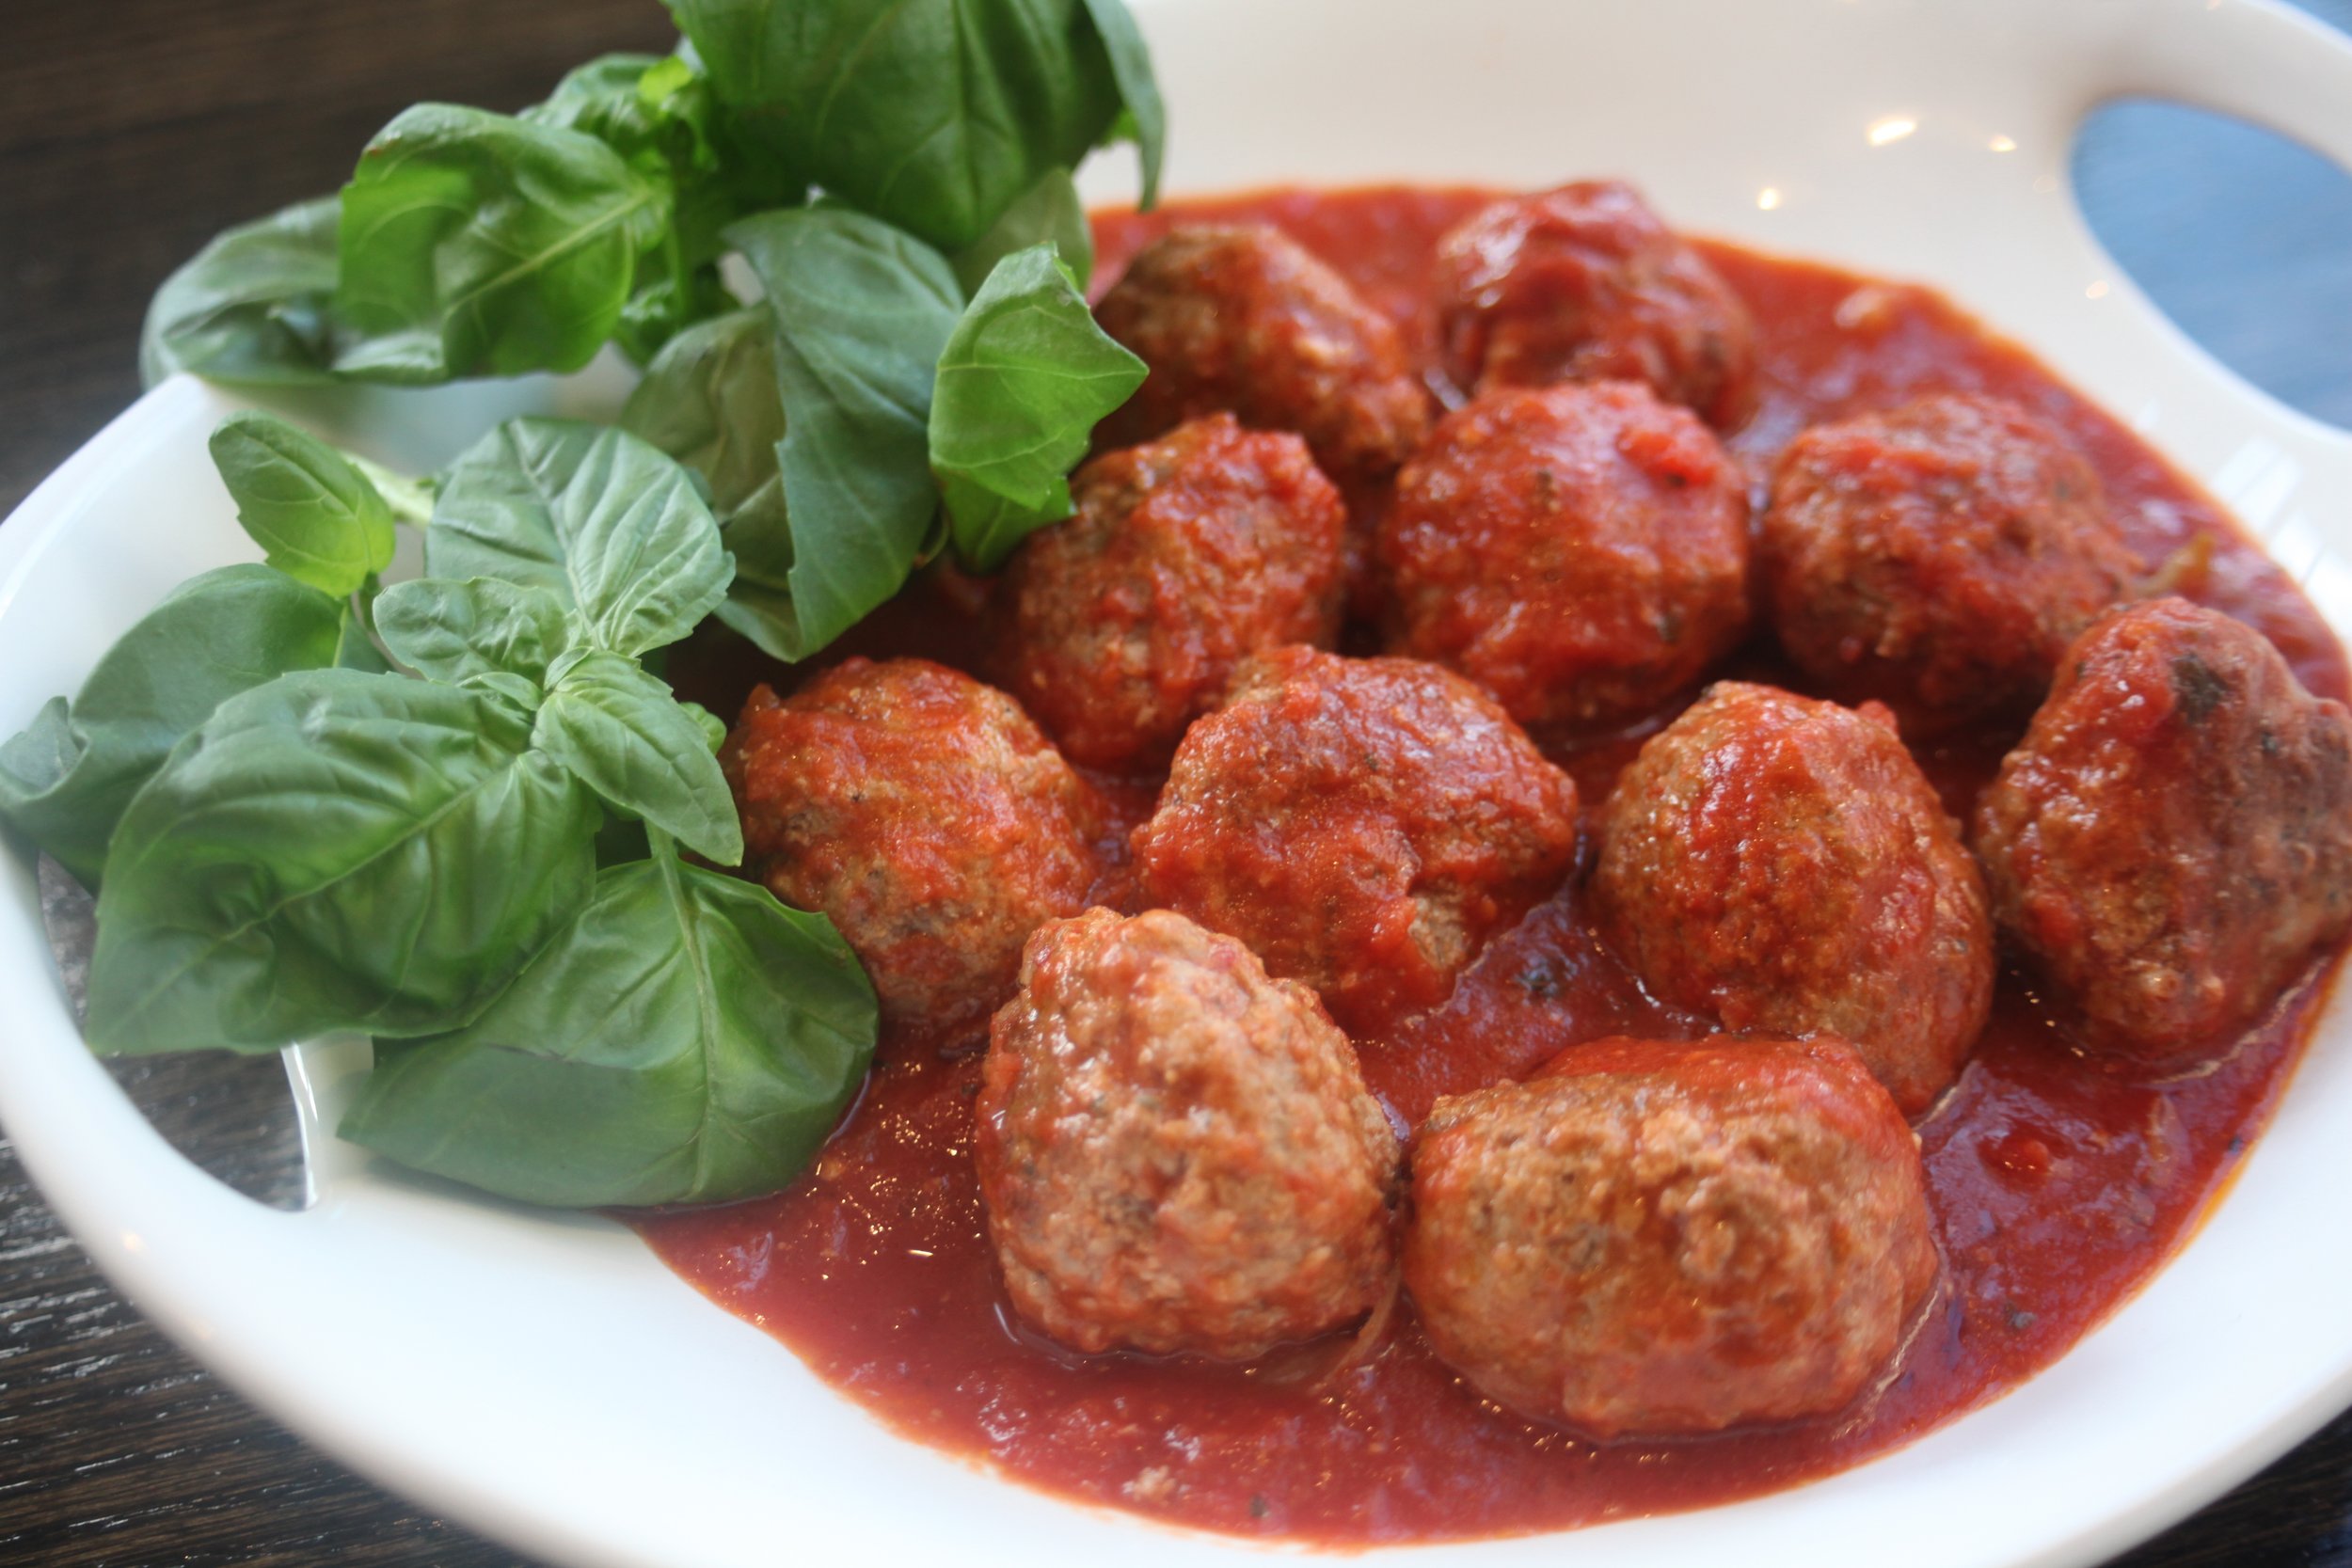 Saucy meatballs to put in casserole